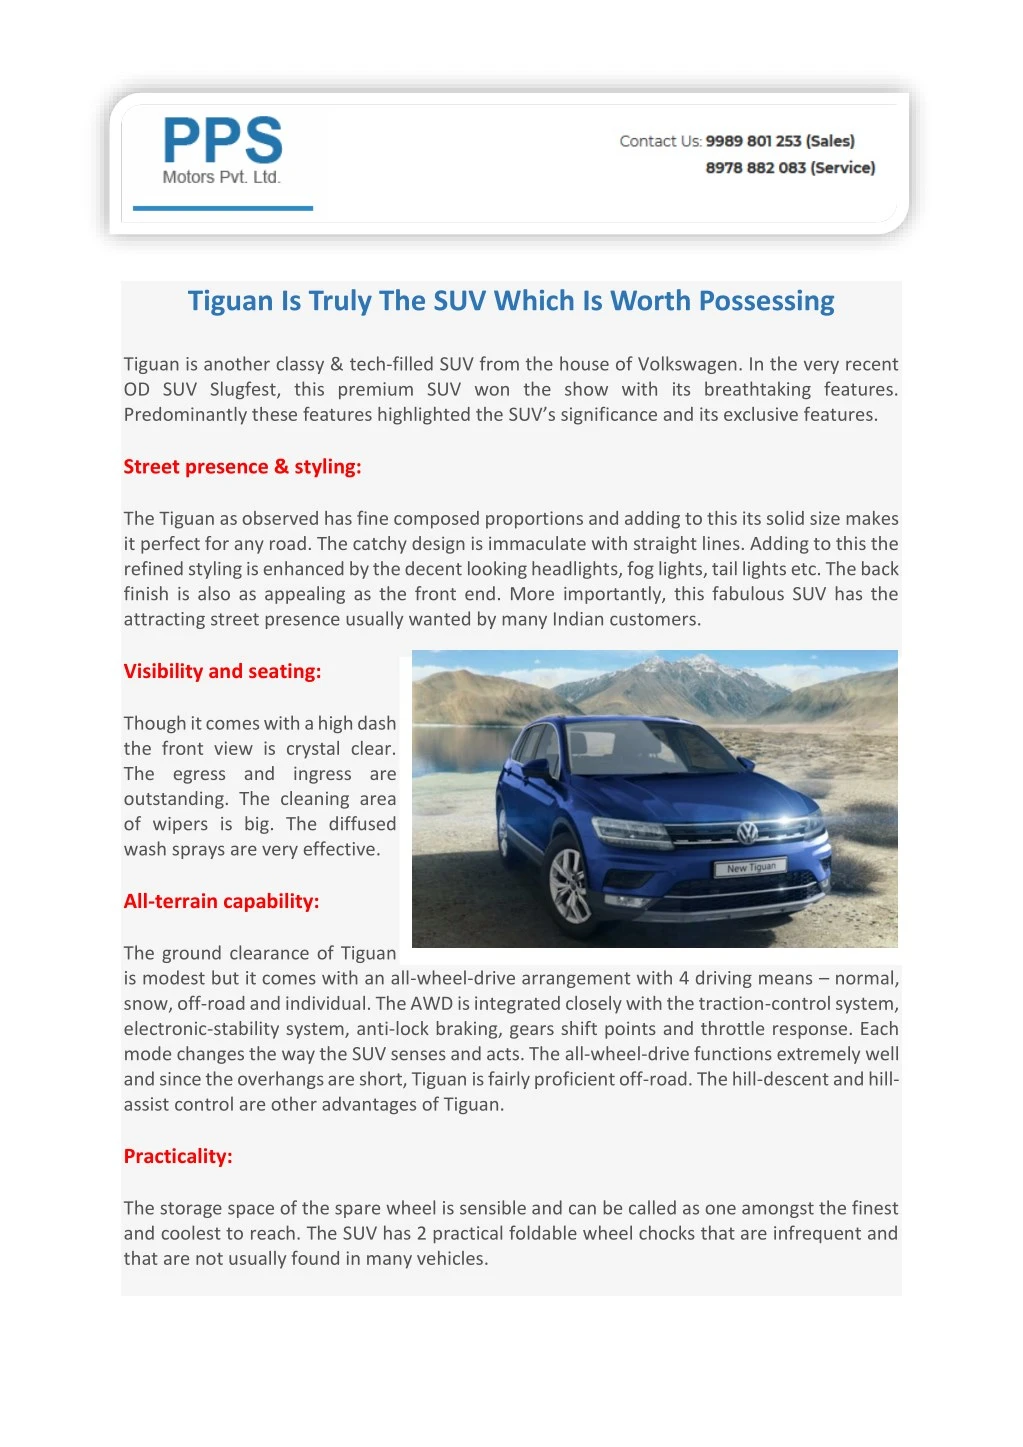 tiguan is truly the suv which is worth possessing